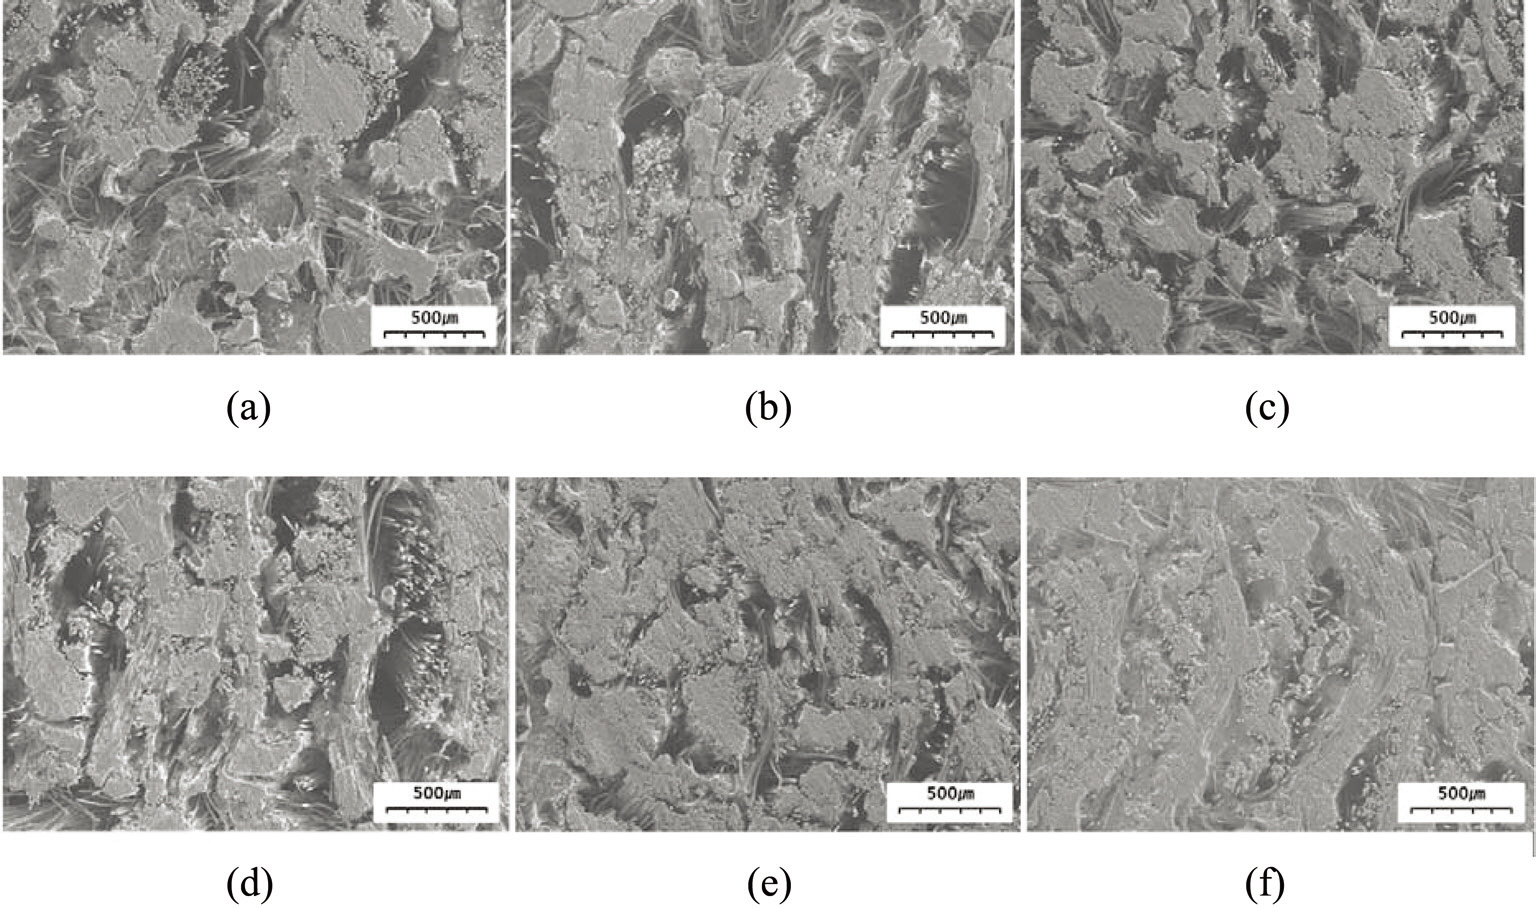 Microstructures of the composites prepared at different heat-treatment temperatures: (a) 1000℃ with 0% illite (b) 1650℃ with 0% illite (c) 2300℃ with 0% illite (d) 1000℃ with 10% illite (e) 1650℃ with 10% illite and (f ) 2300℃ with 10% illite.